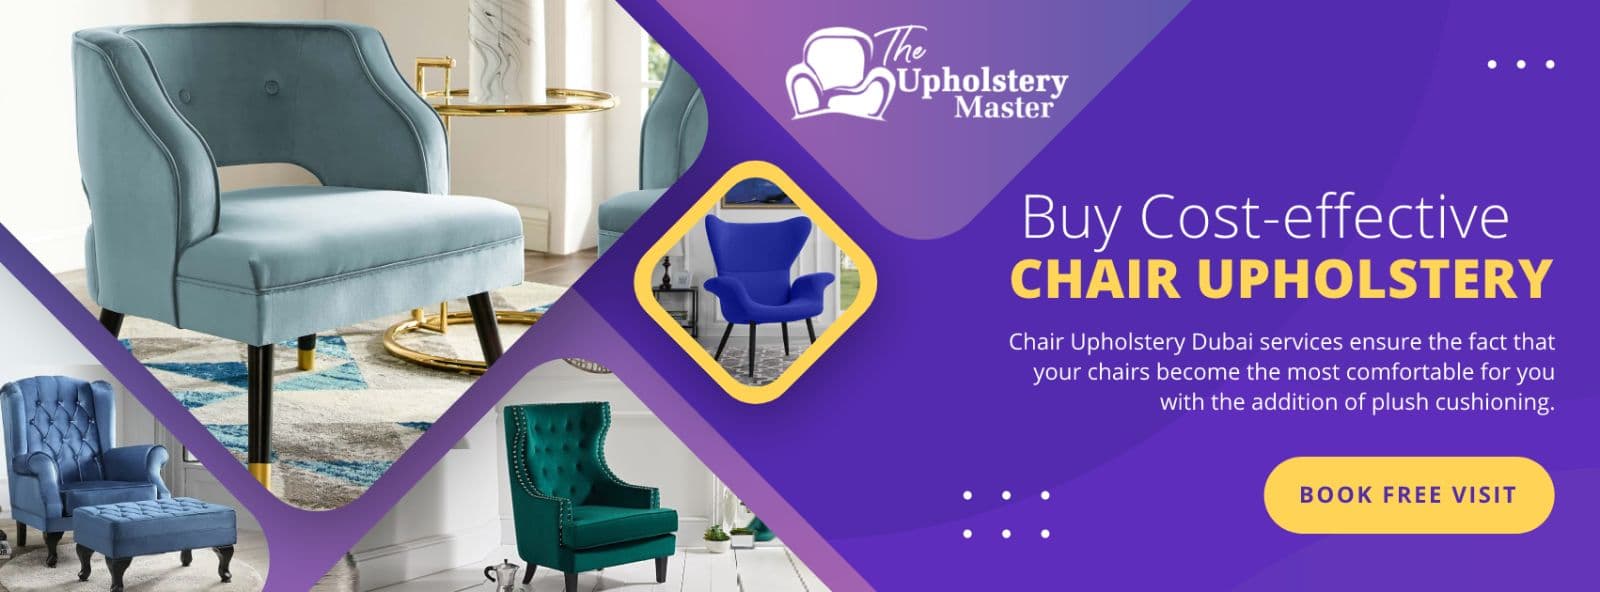 chair upholstery services in Dubai